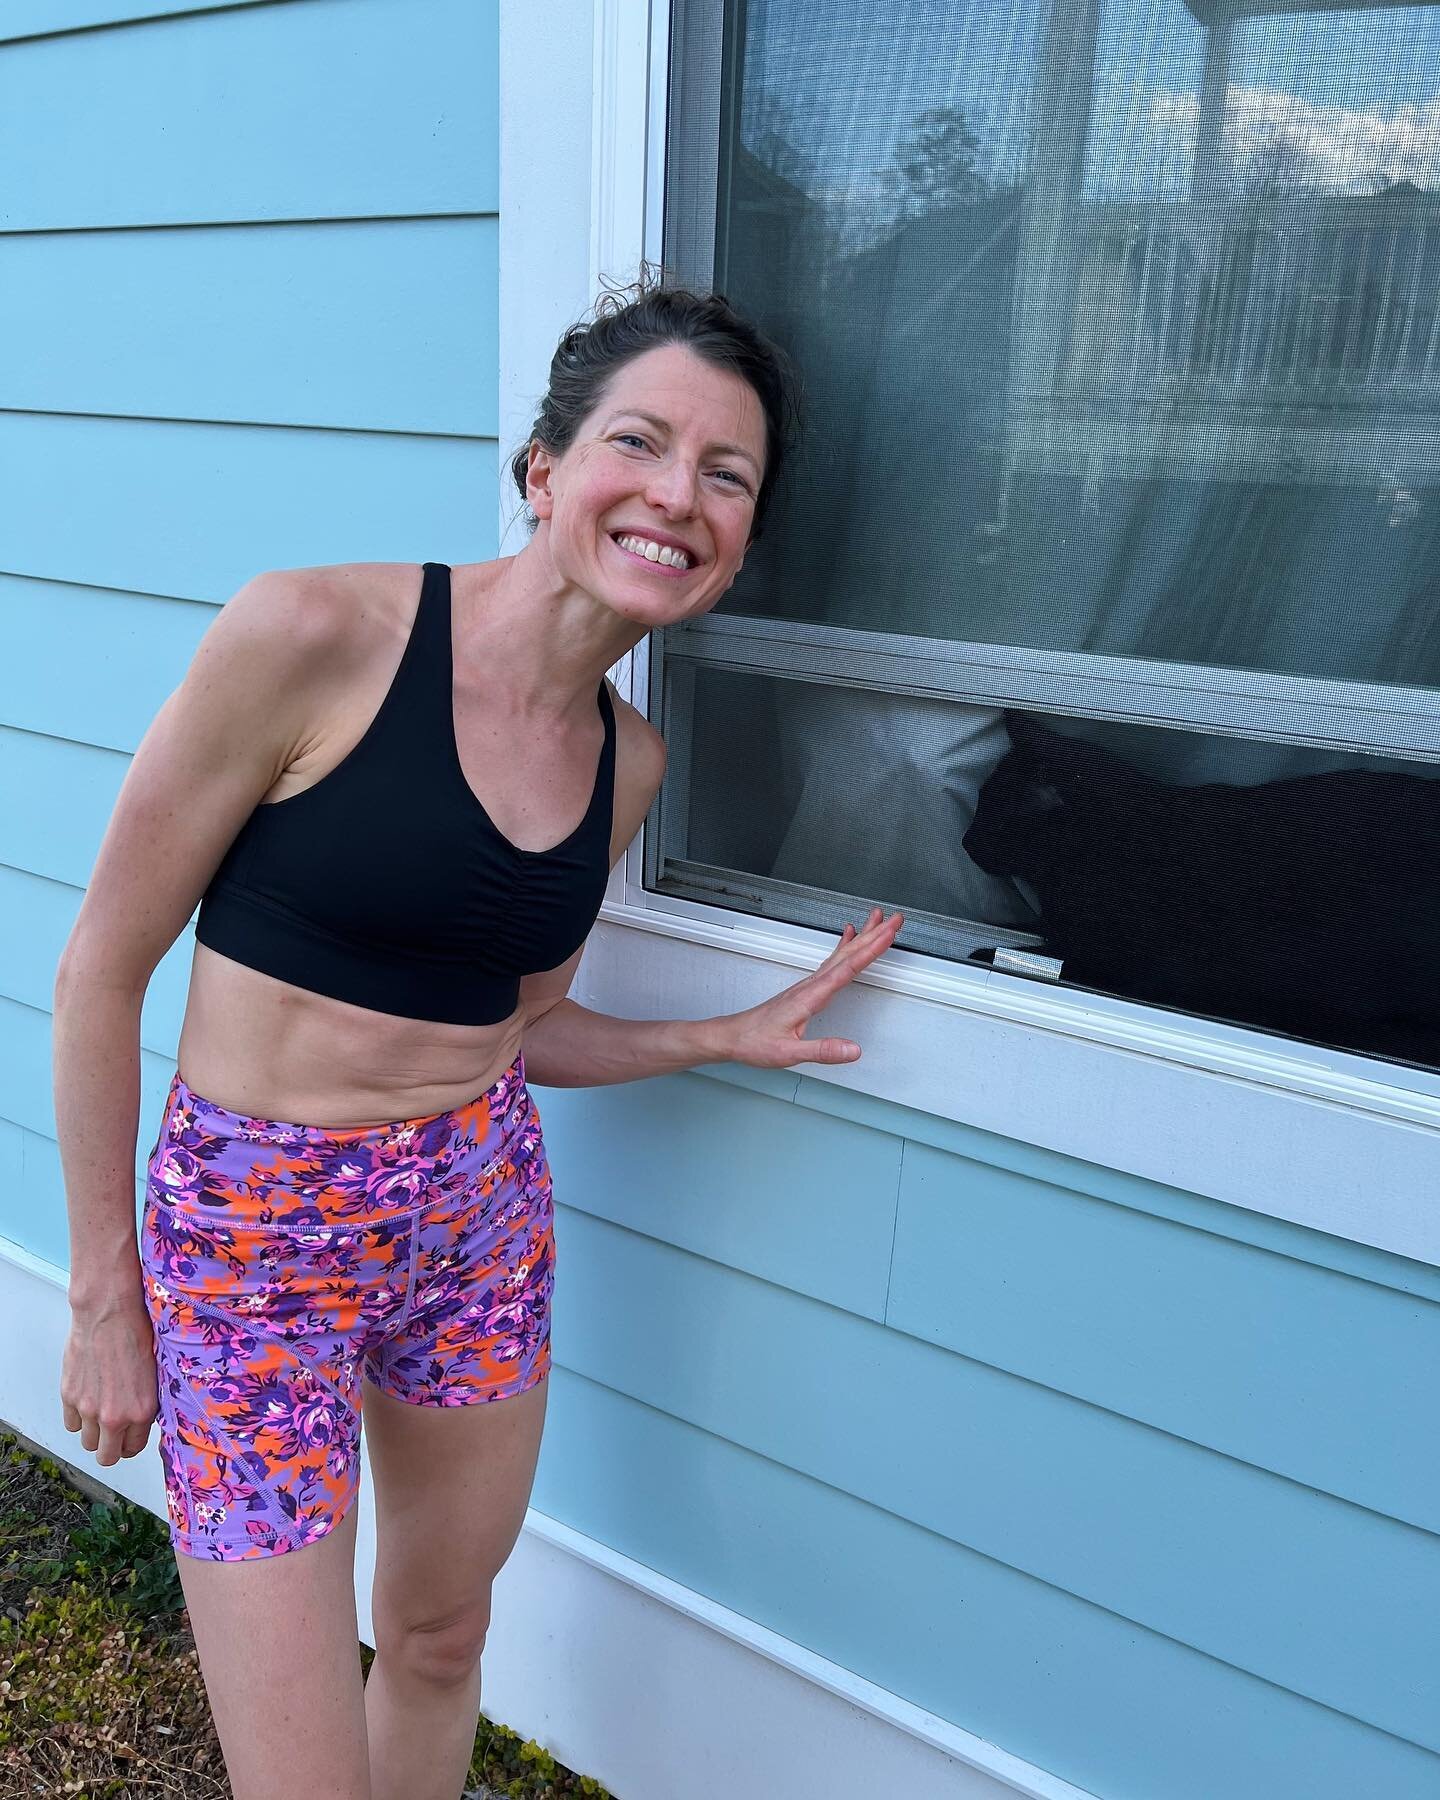 Anybody else&rsquo;s cat wait for you in the window when you go for a run?! Boo Boo also GREATLY enjoys when I do any extra drills in the driveway which serves as extra motivation to do said drills because I&rsquo;m entertaining my fur baby at the sa